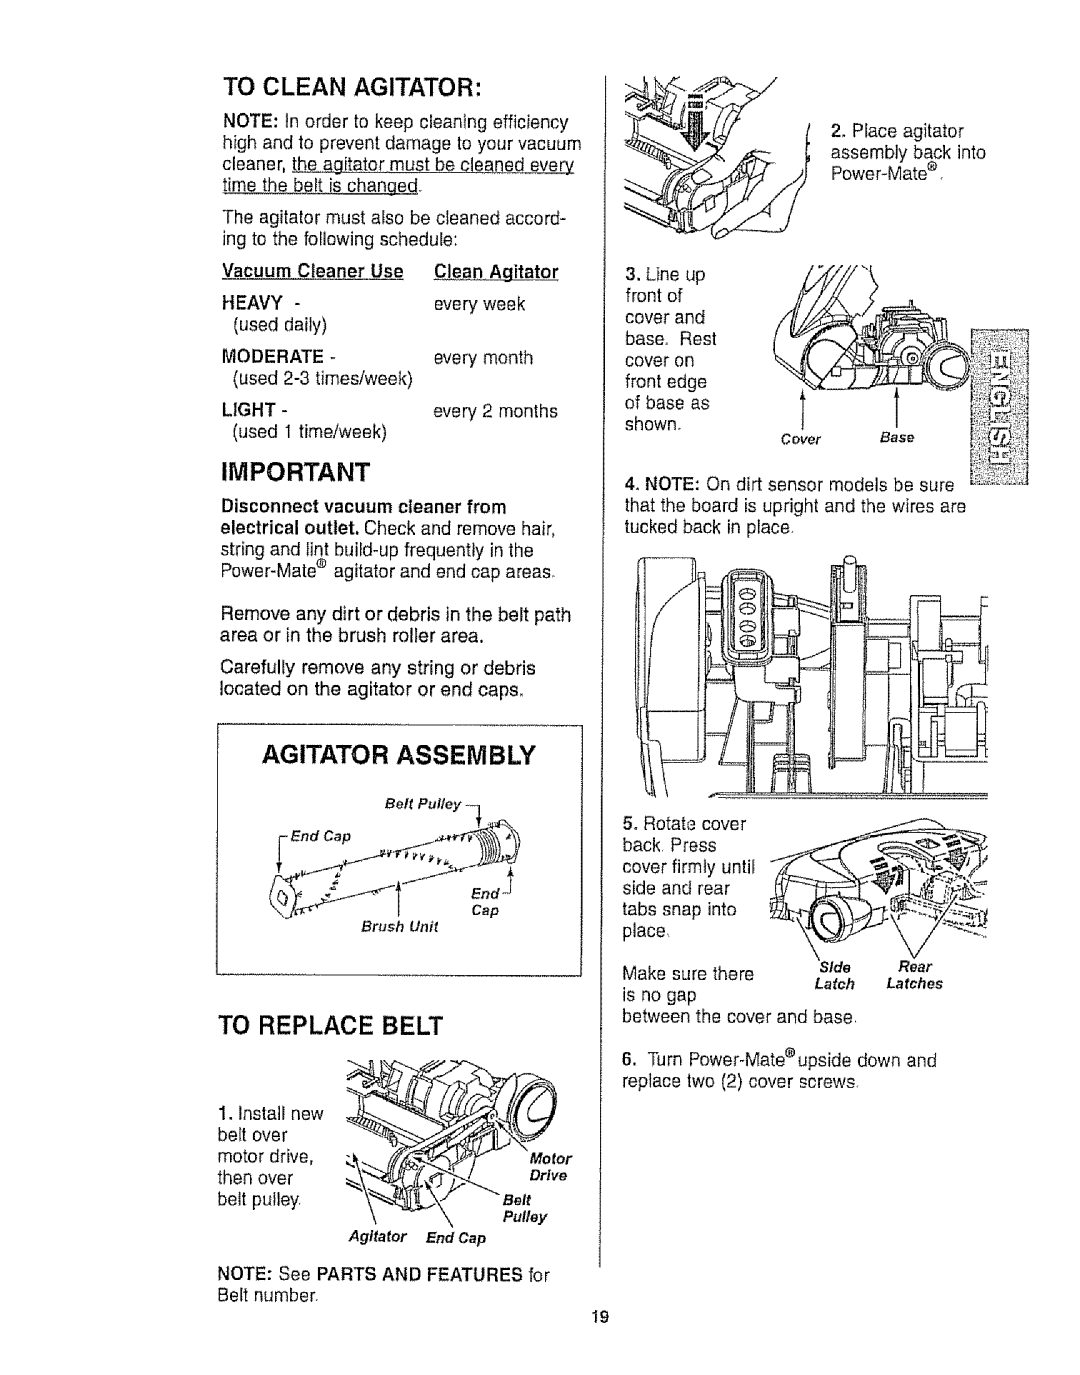 Kenmore 116.25812 owner manual Agitator Assembly, To Clean Agitator, To Replace Belt, Heavy 